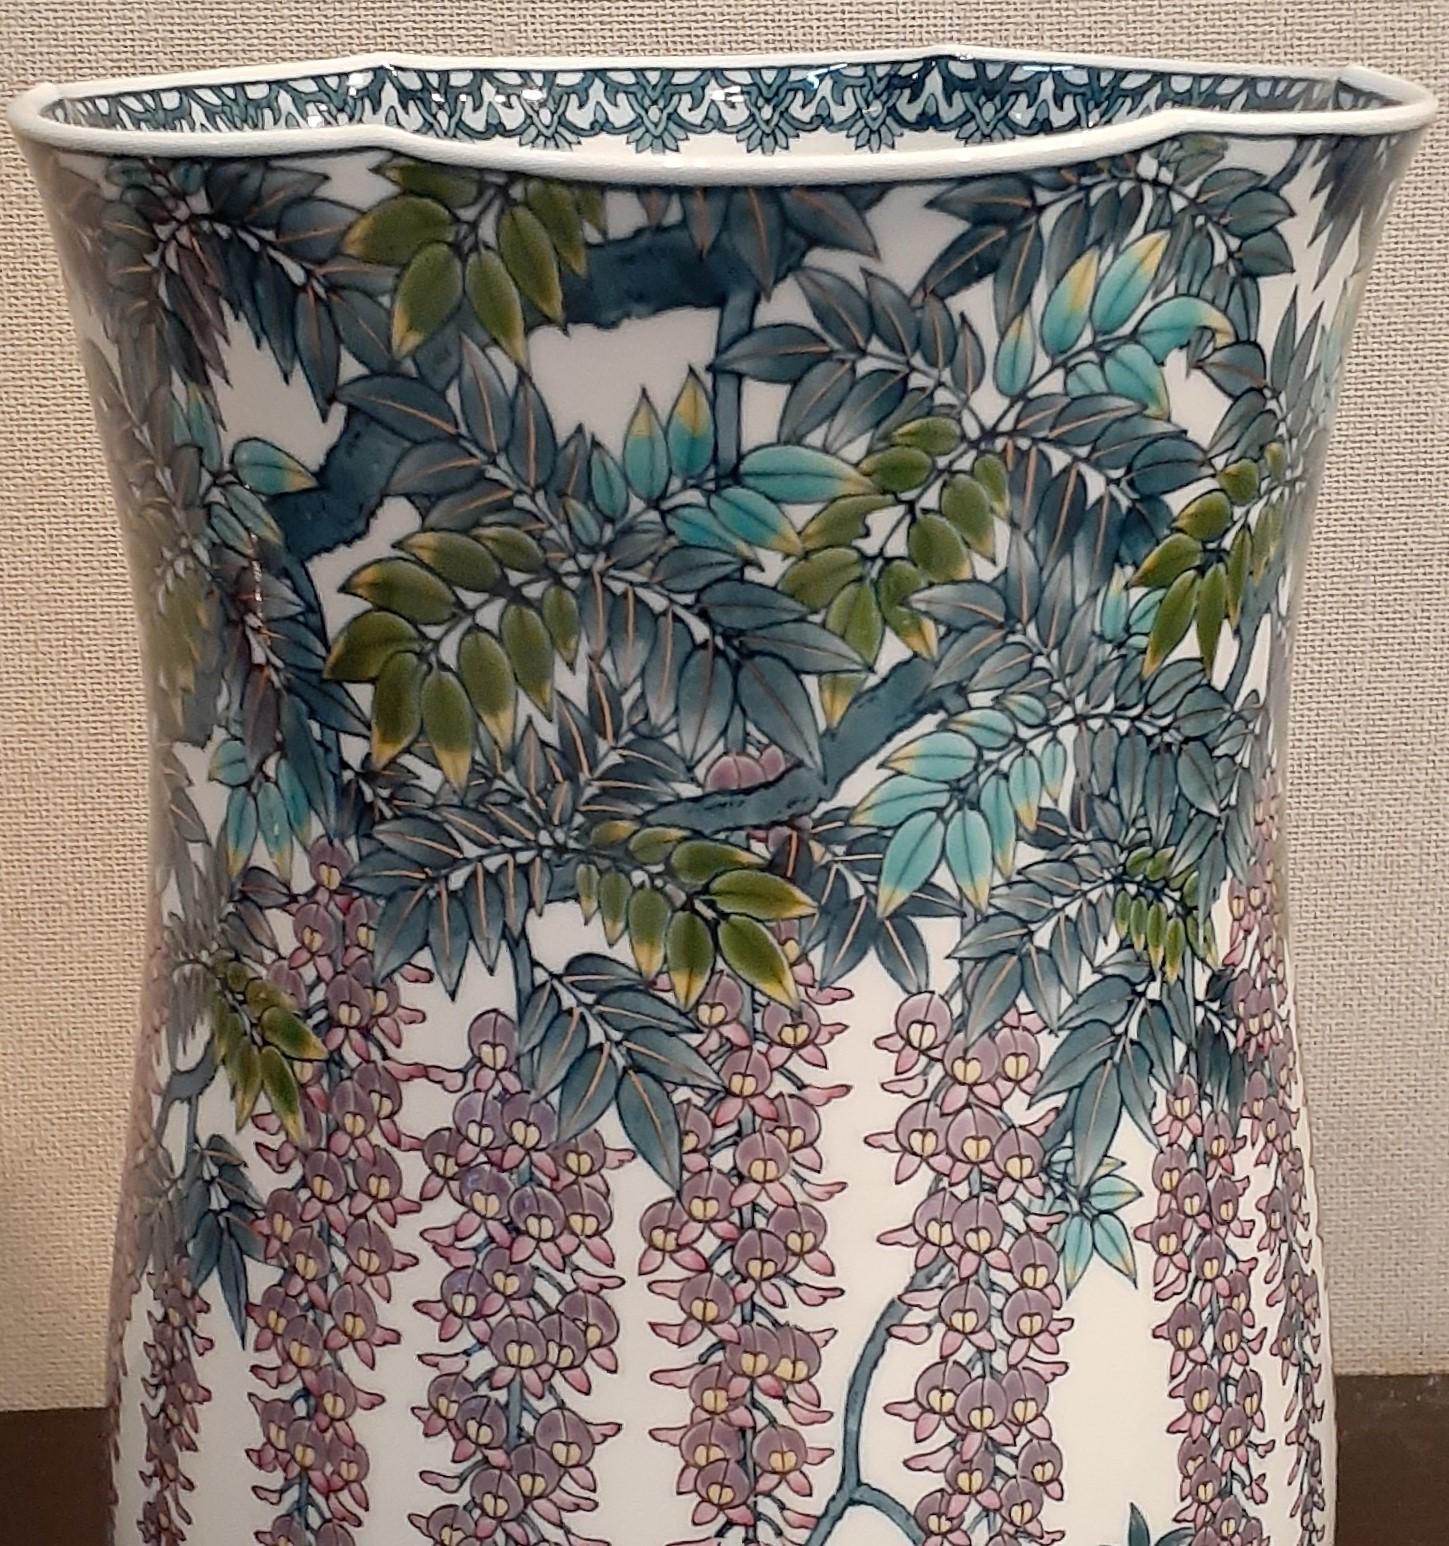 Exquisite contemporary Japanese museum-quality decorative signed porcelain vase, extremely intricately hand painted in vivid purple, blue and turquoise to showcase dramatic wisterias and vines, on an elegantly shaped body with a stunning scaloped